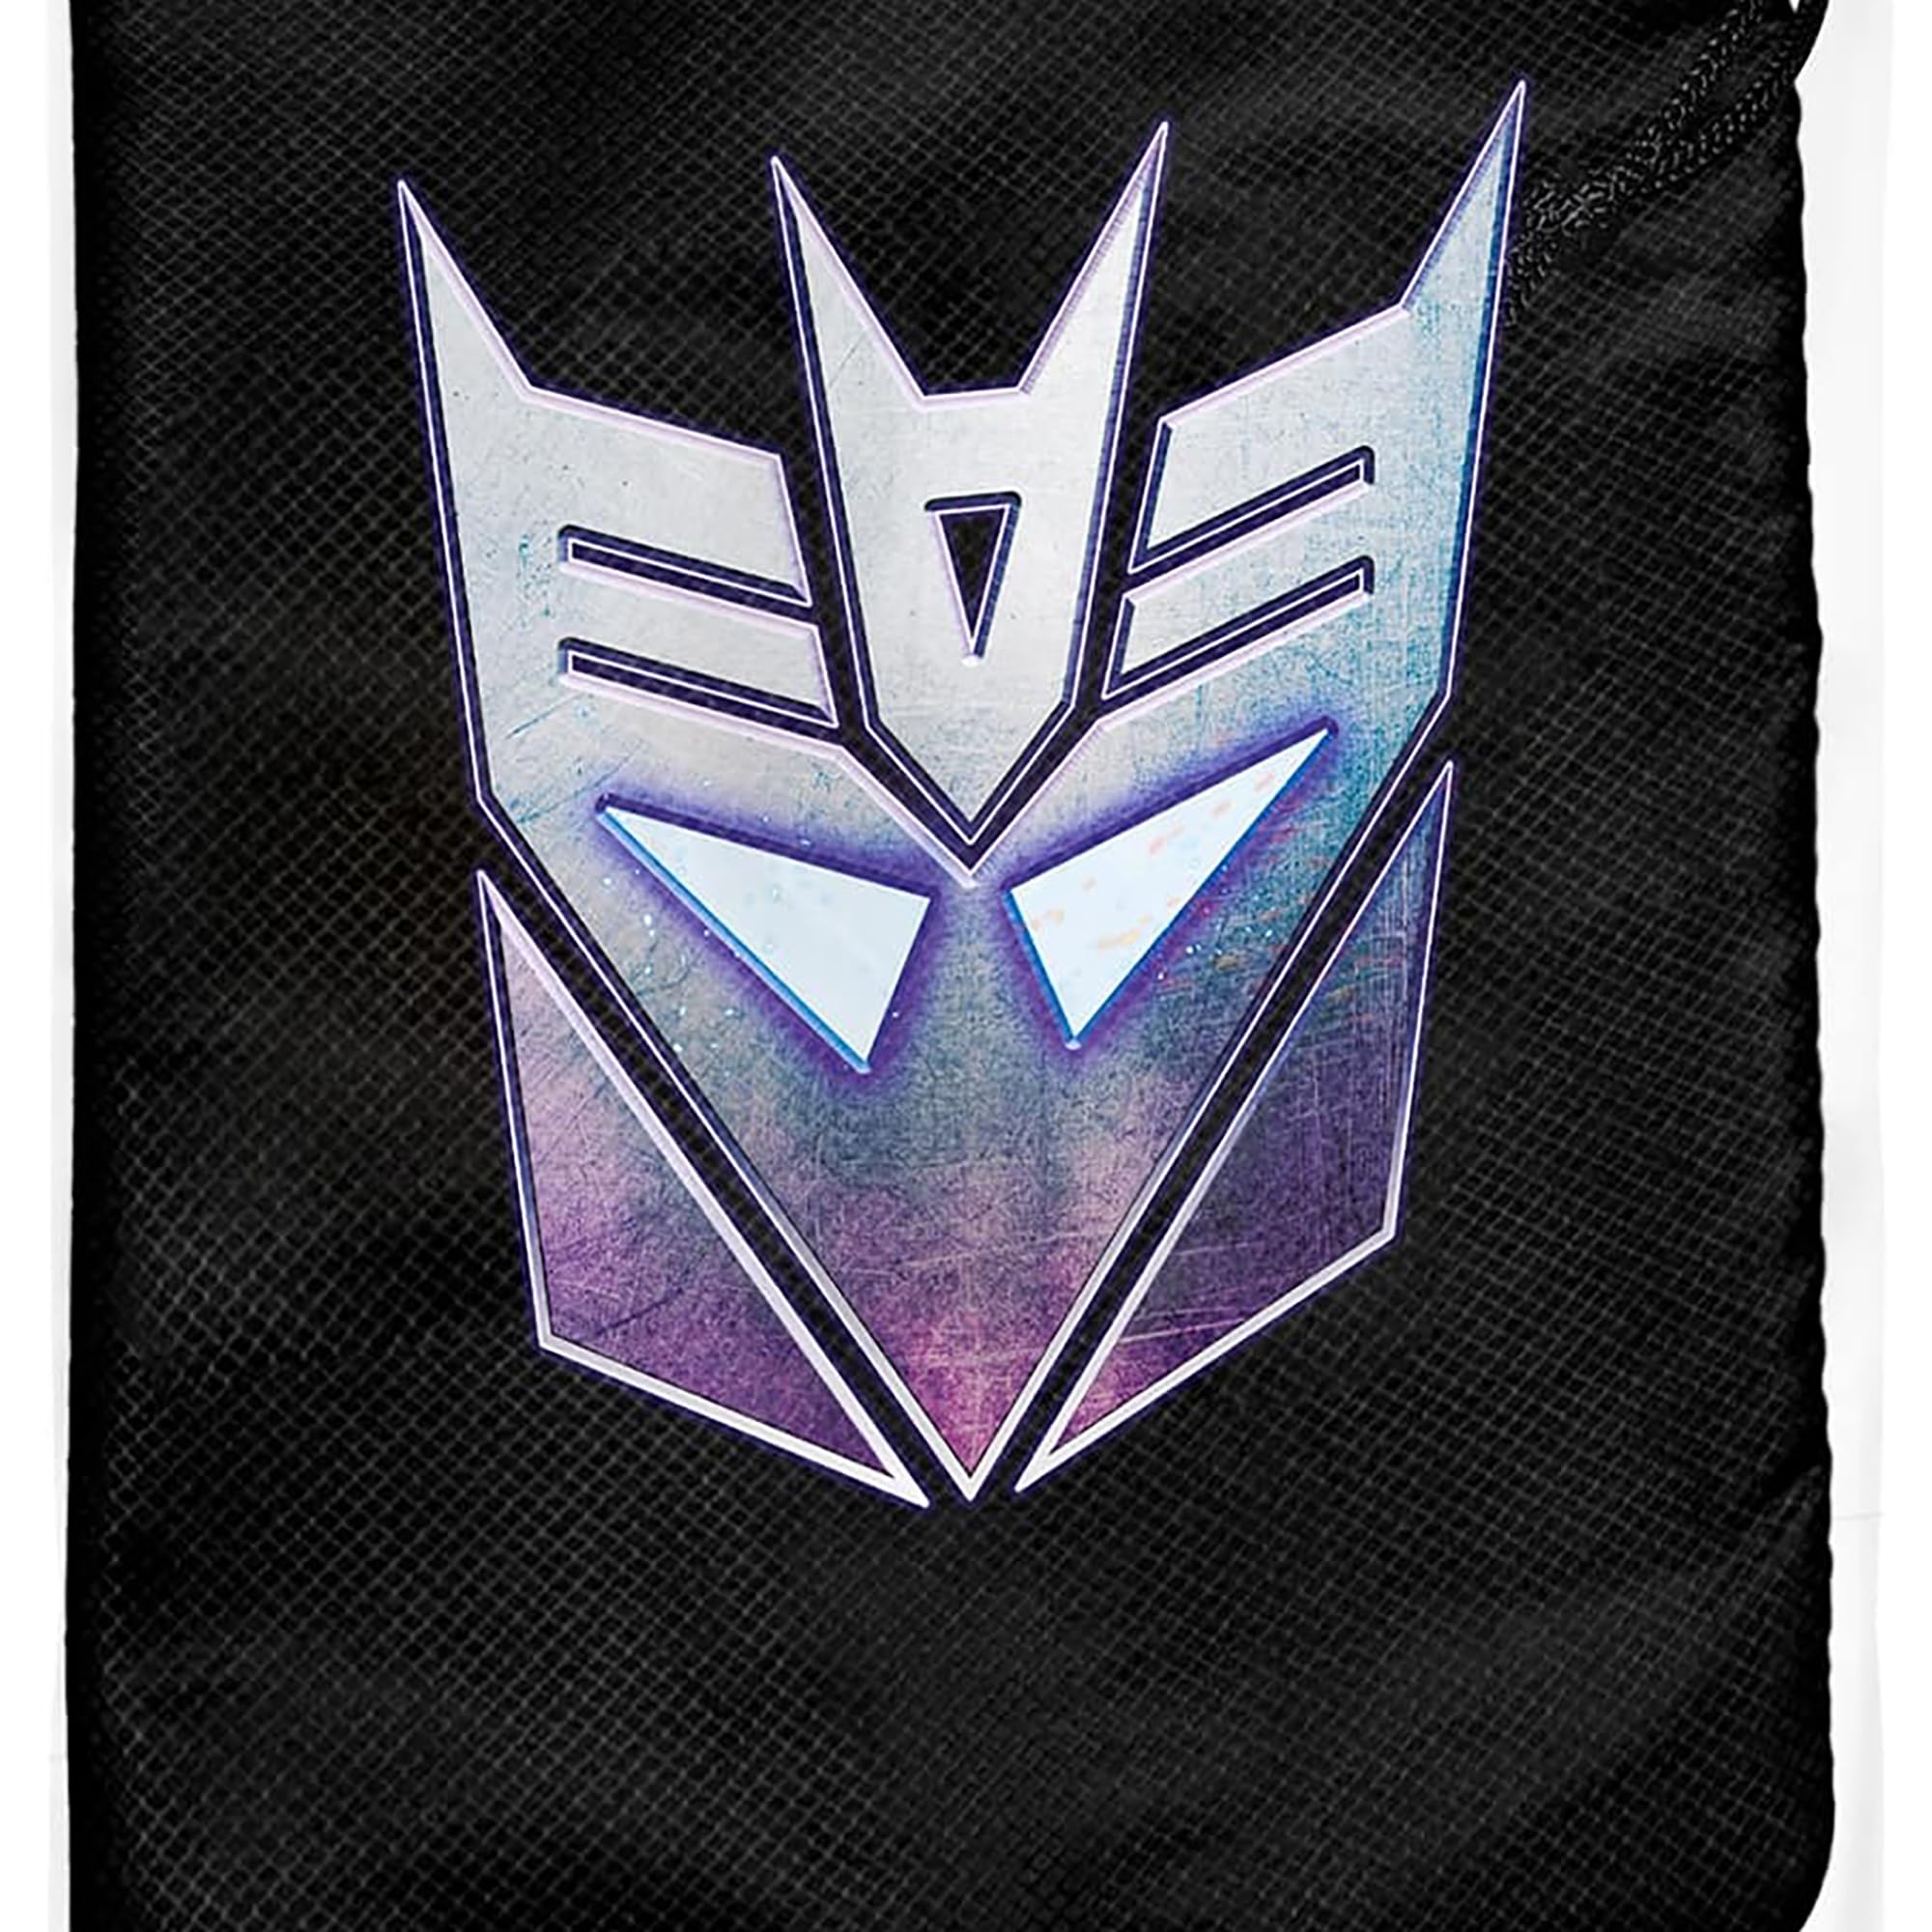 Renegade Game Studios: Transformers RPG Decepticon Dice Bag - Roleplaying Game Accessory, Locking Drawstring,, Double-Lined Fabric